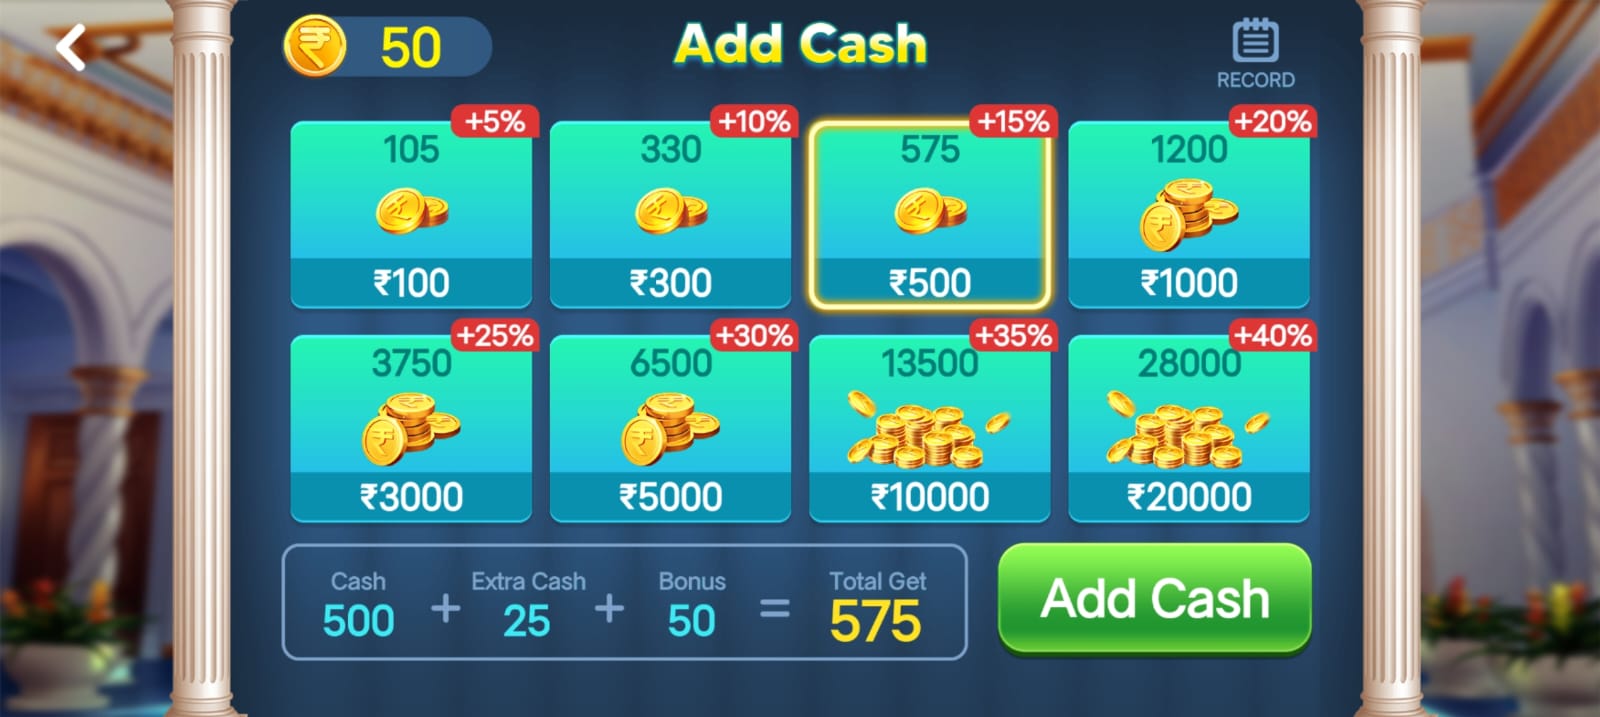 How To Add Money In 3 Patti Epic Application ?